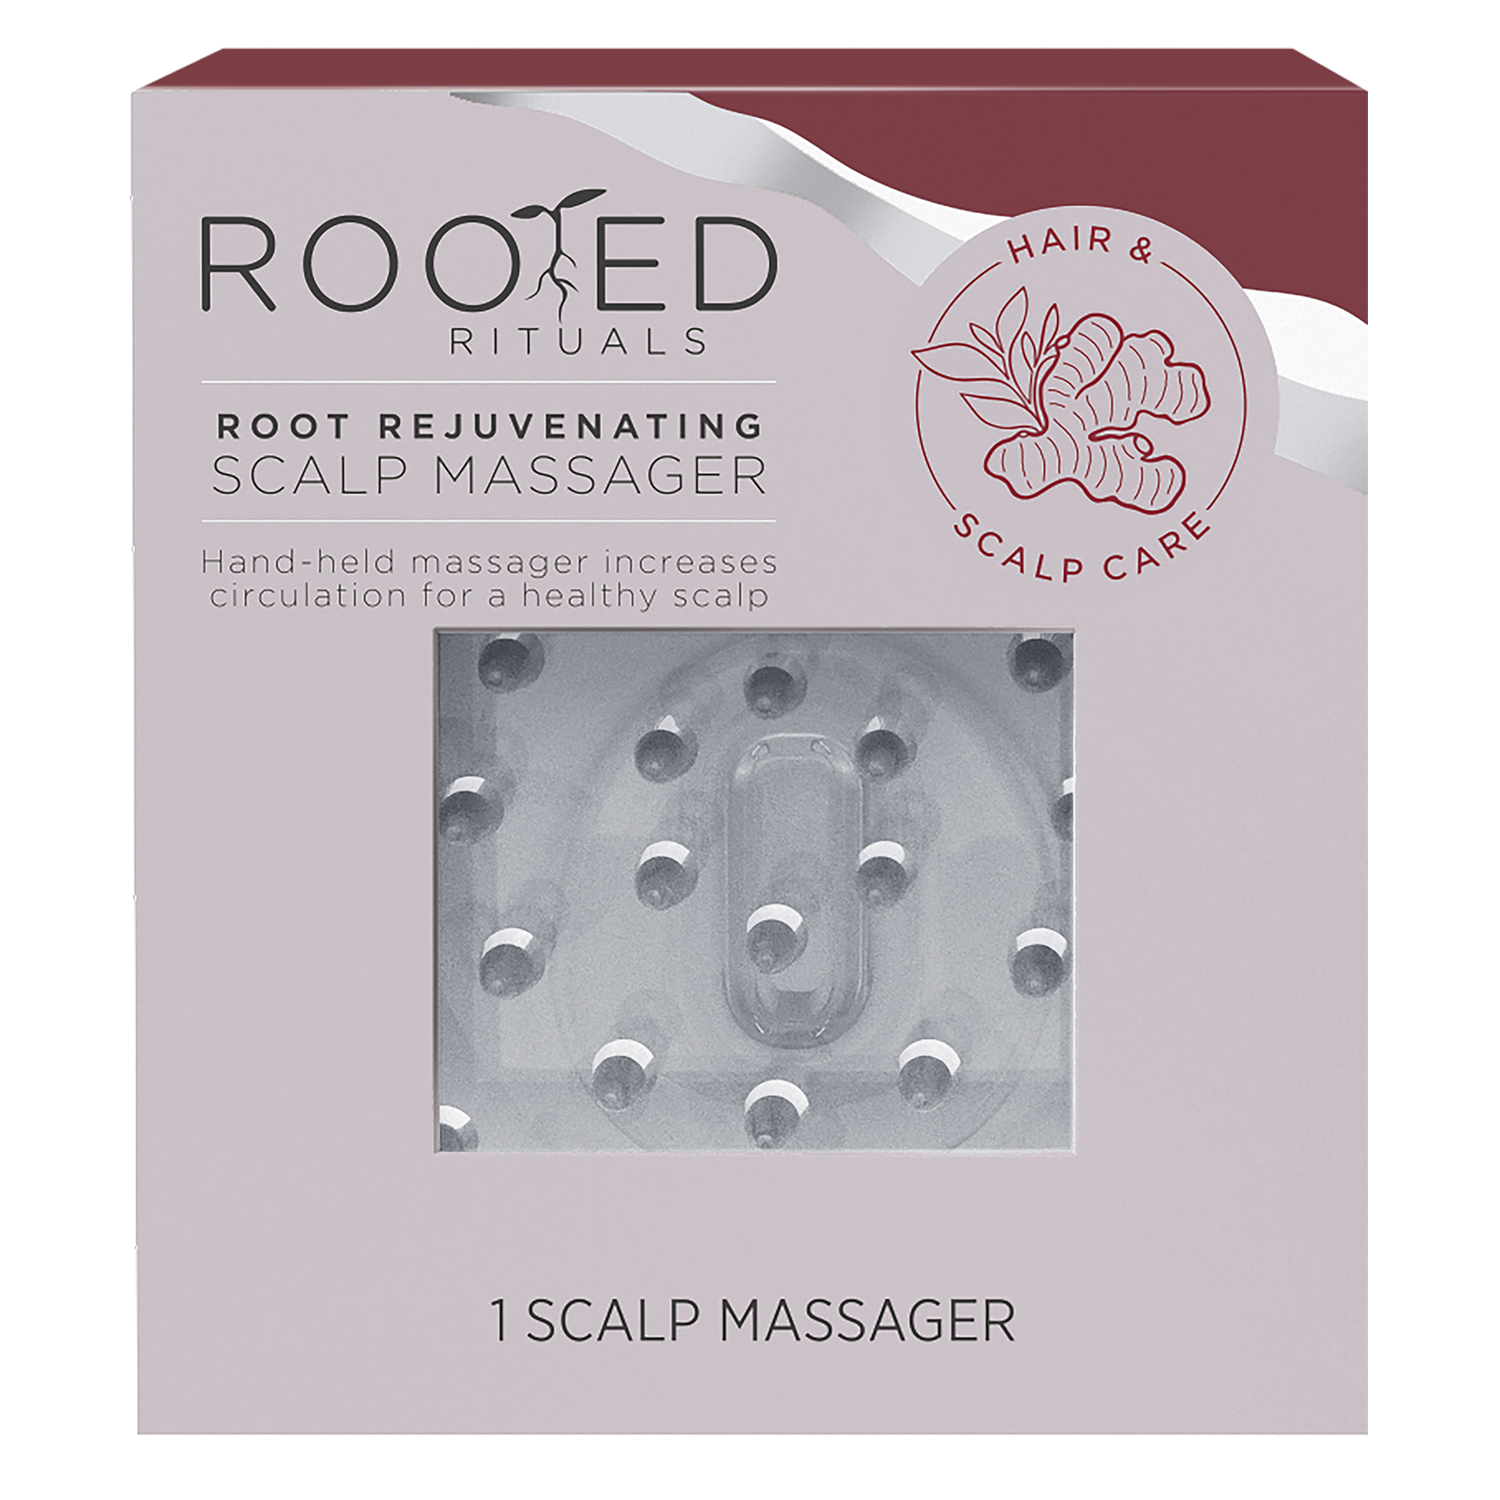 Rooted Rituals Root Rejuvenating Scalp Scrubber - image 1 of 10